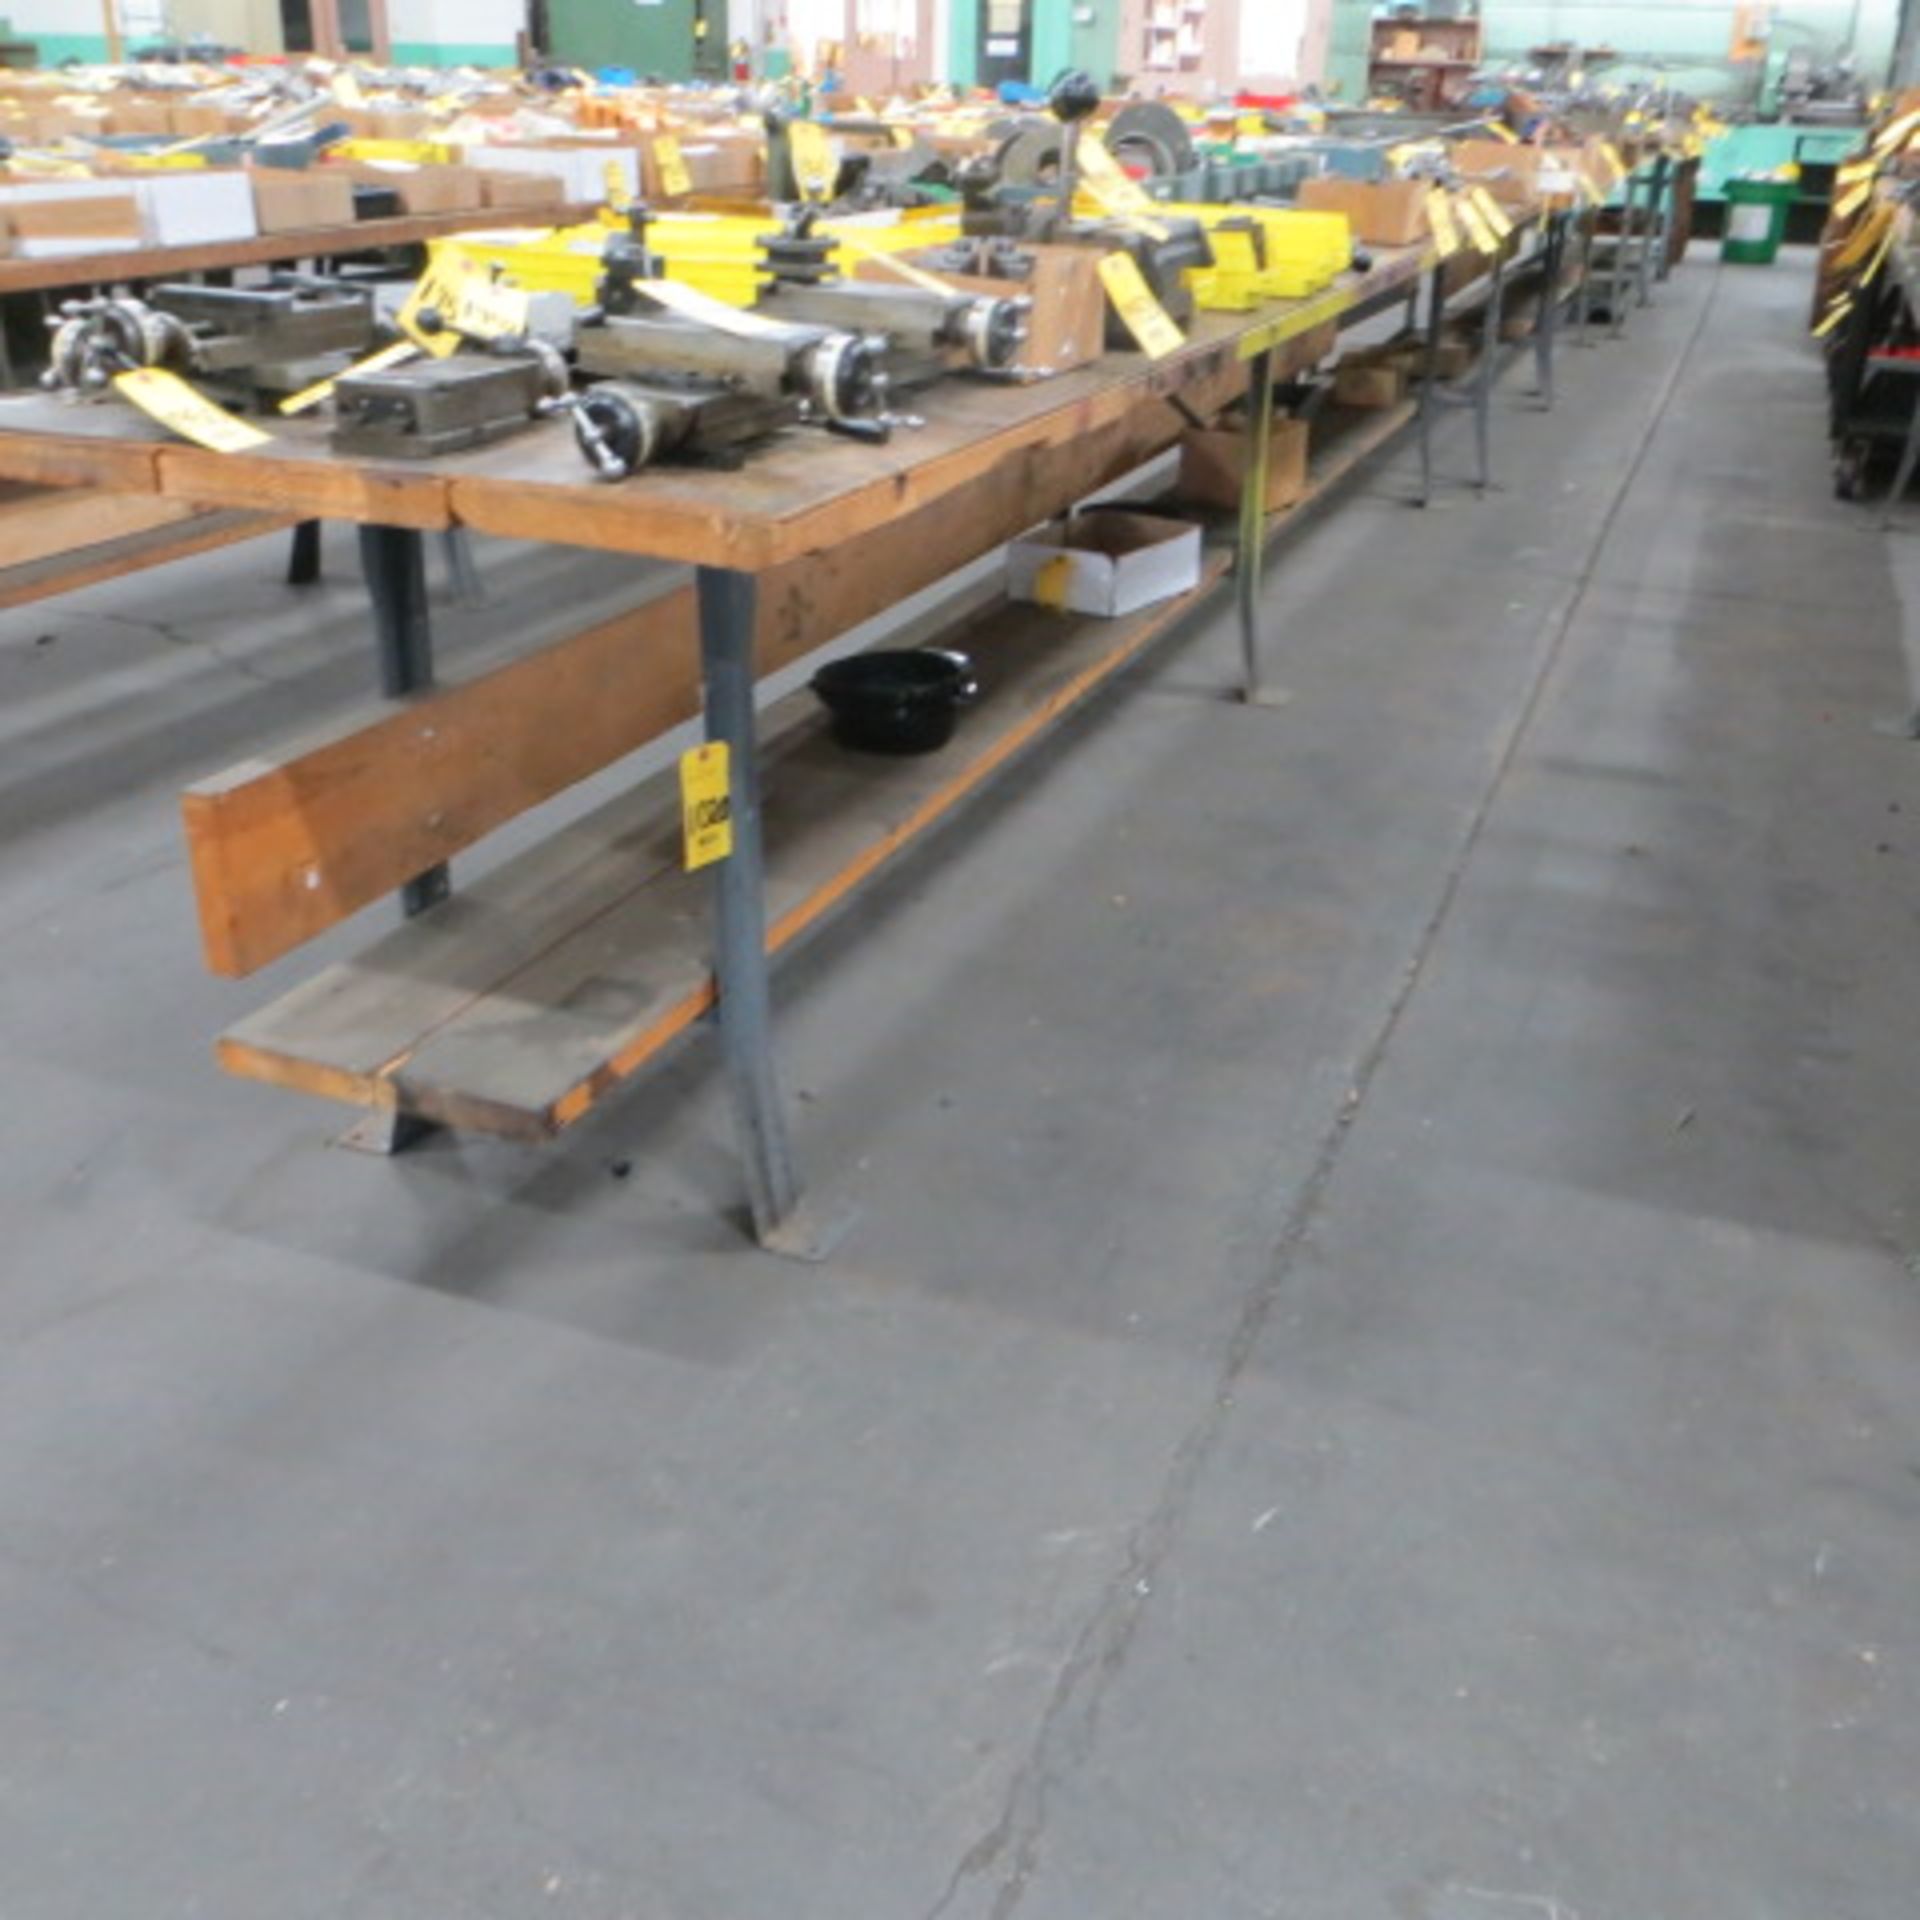 (2) 16 FT WORK BENCHES